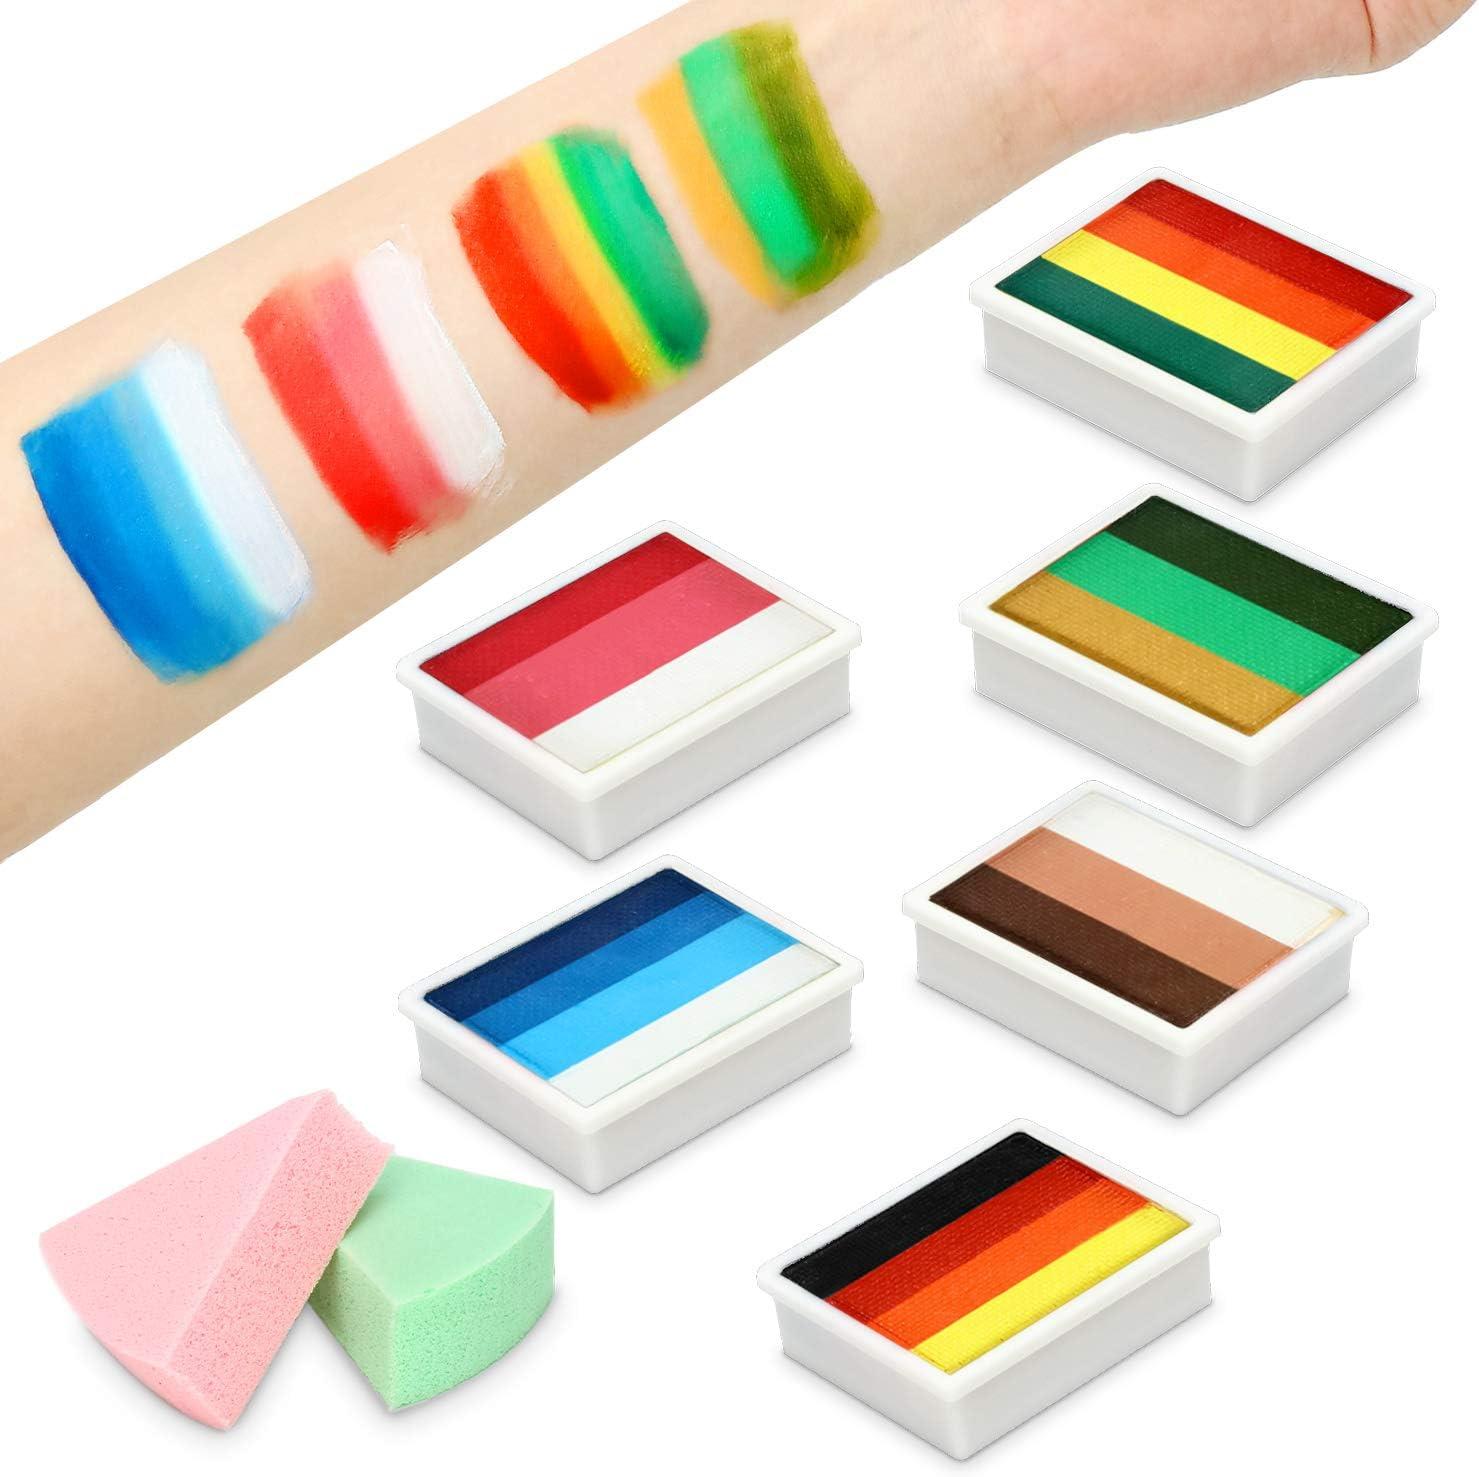  Maydear Face Painting Kit For Kids, 12 Colors Safe And  Non-Toxic Large Water Based Face Body Paint